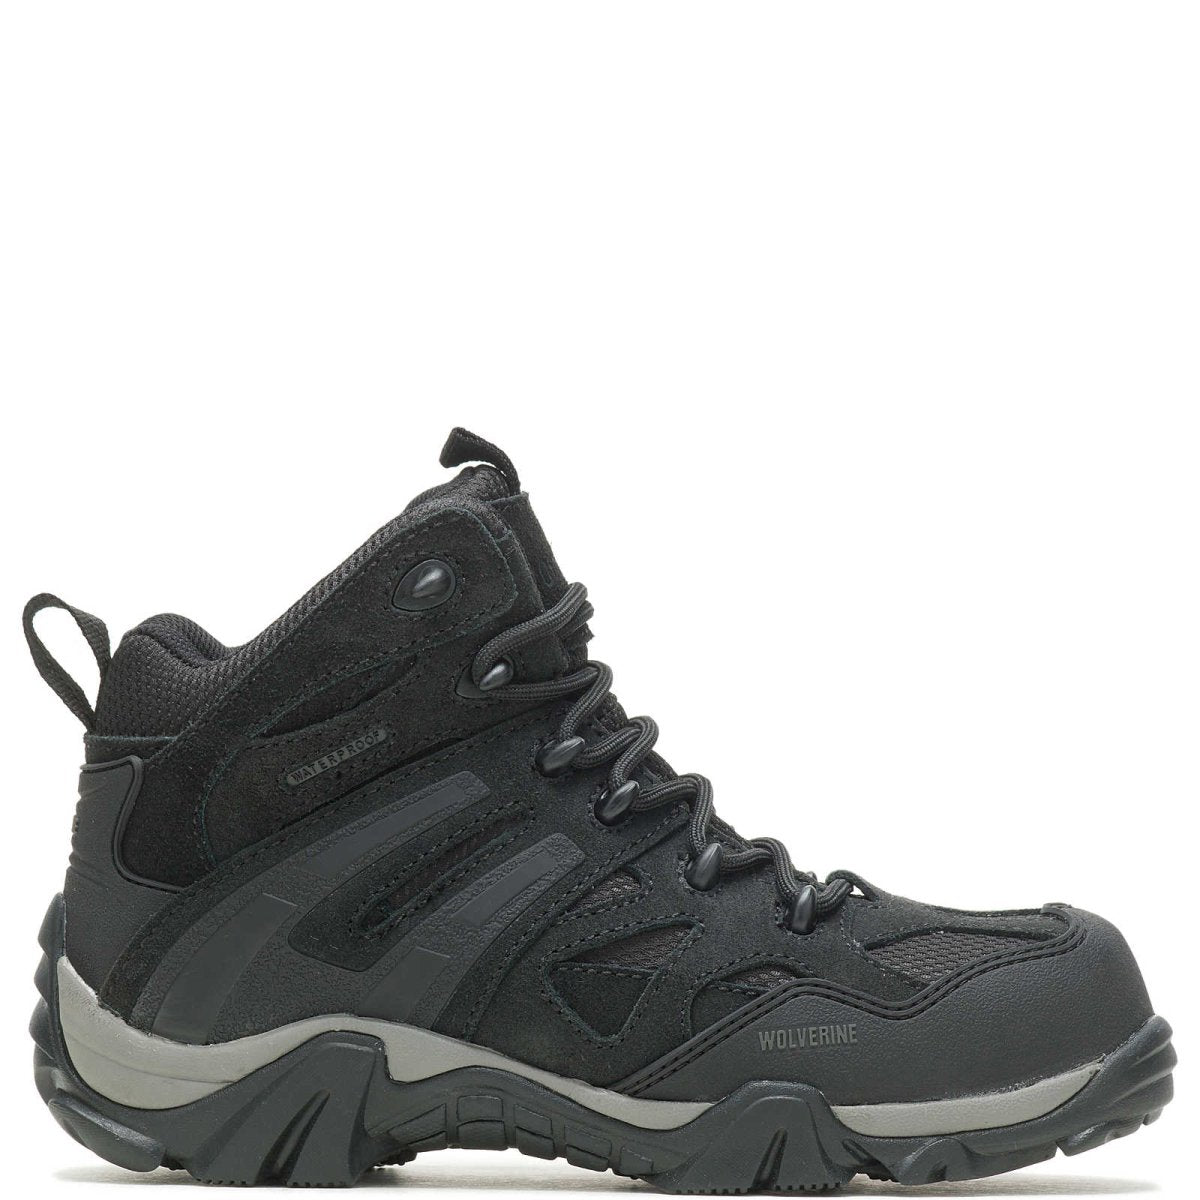 WOLVERINE WILDERNESS WOMEN'S WILDERNESS COMPOSITE TOE BOOT (W881017) IN BLACK - TLW Shoes